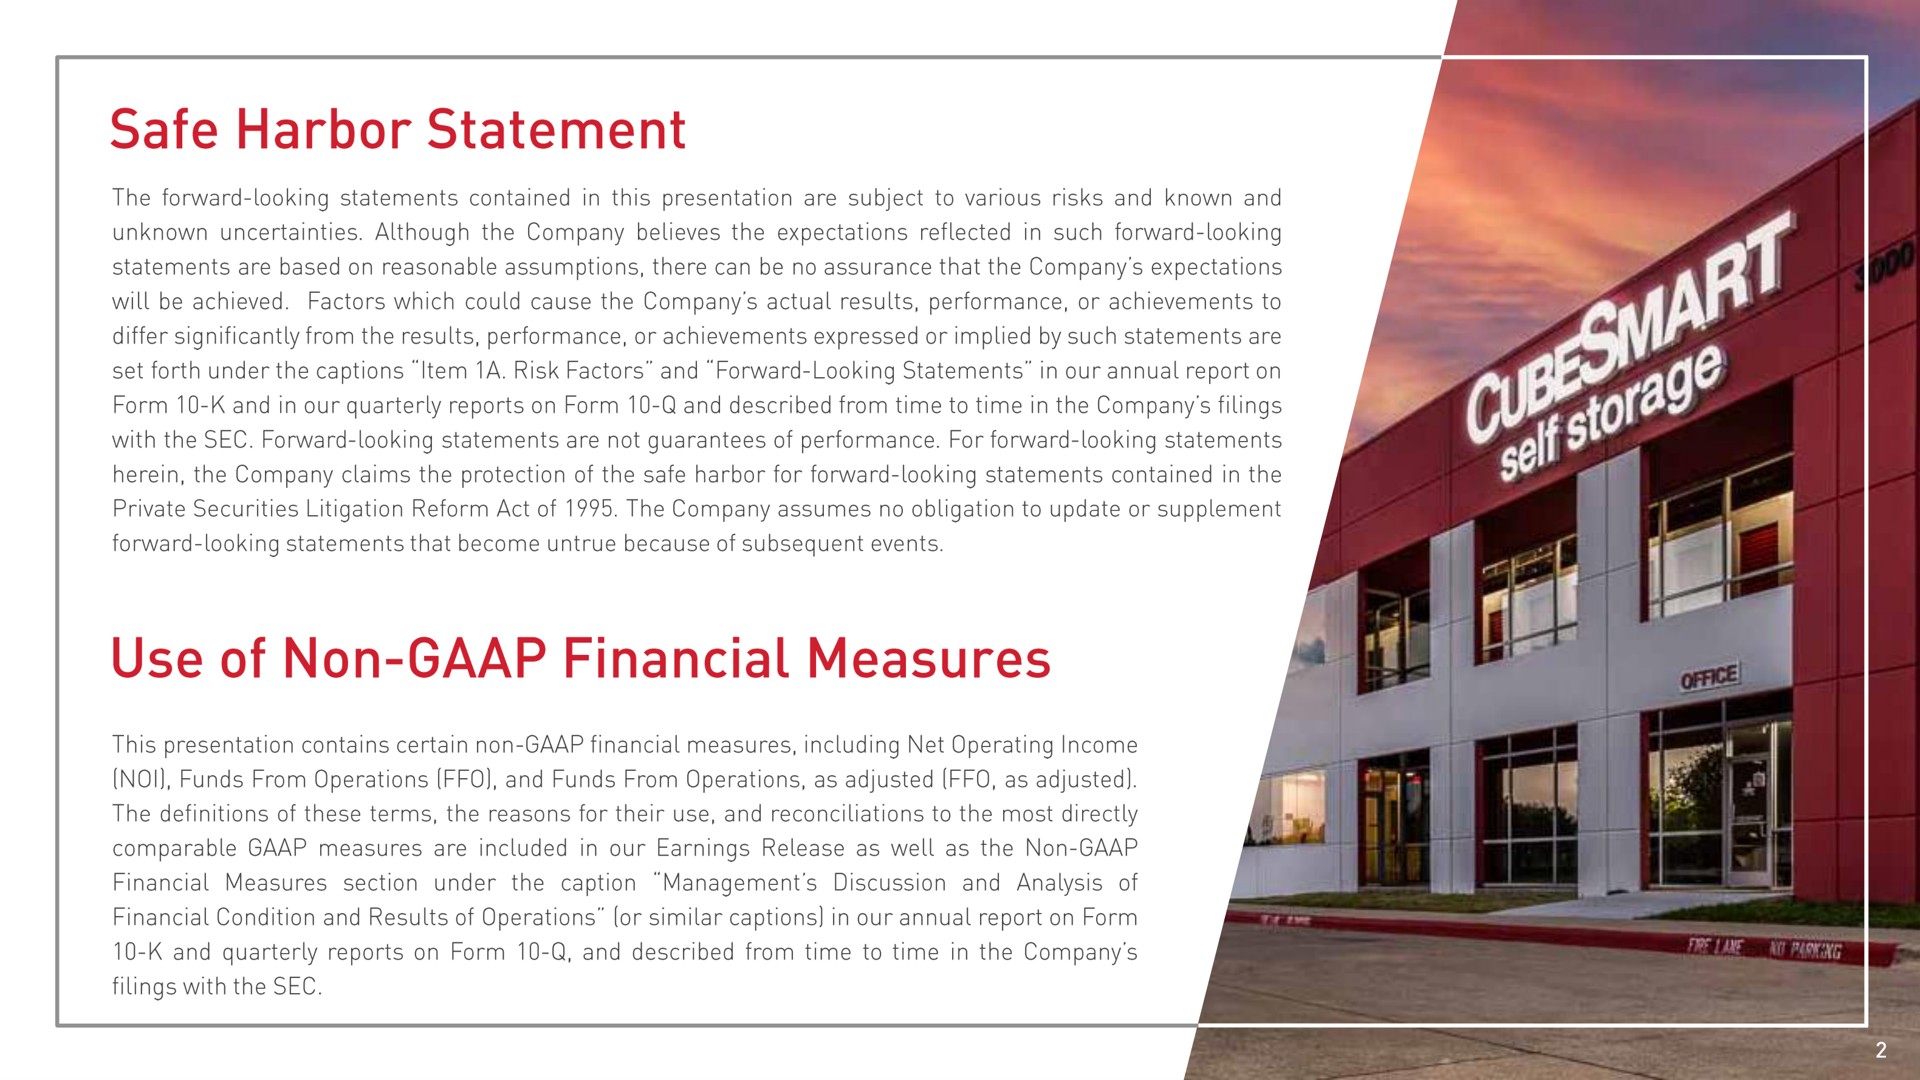 safe harbor statement use of non financial measures | CubeSmart